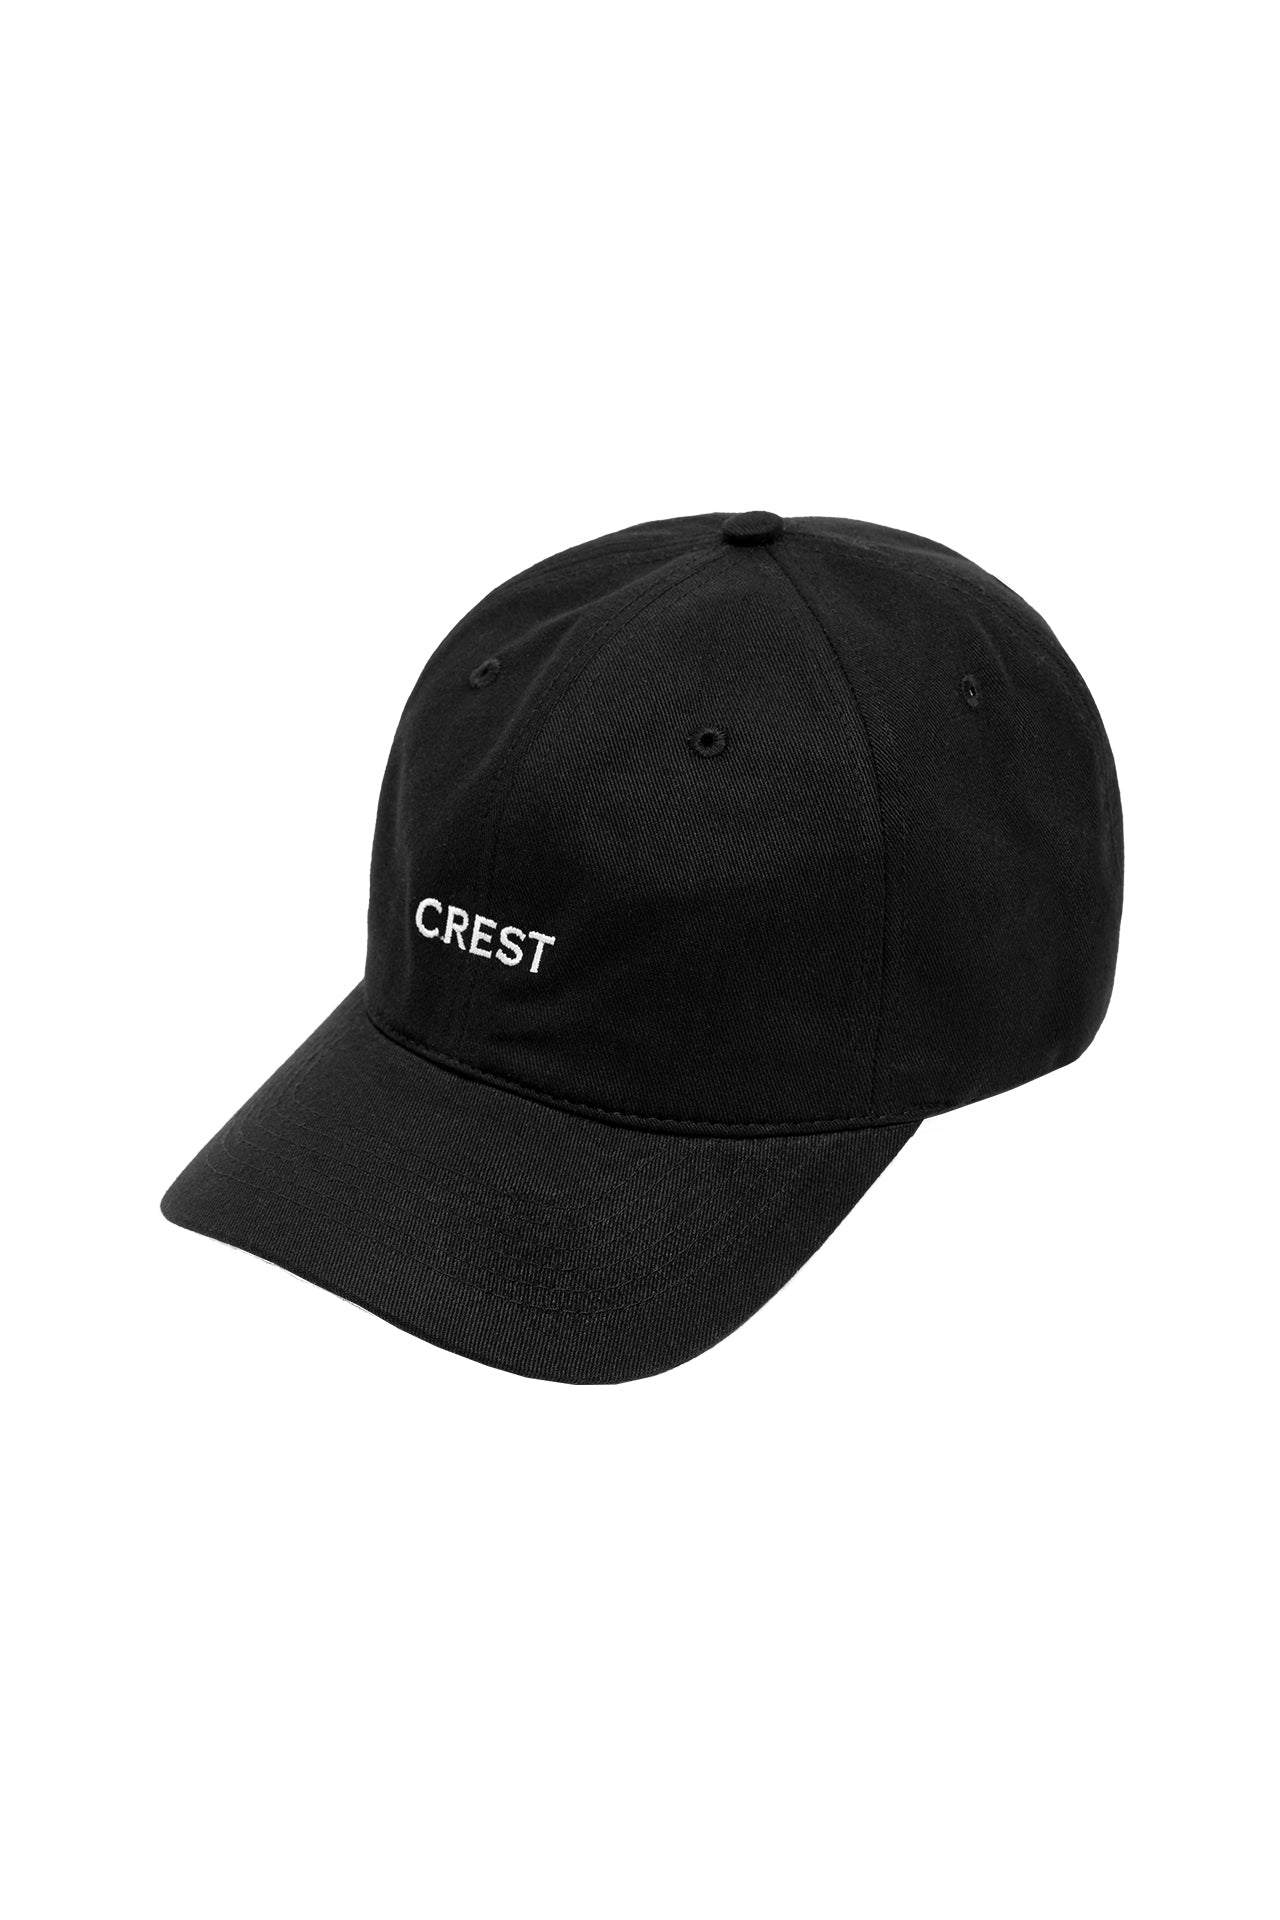 CREST Embroidery 6 Panel Hat